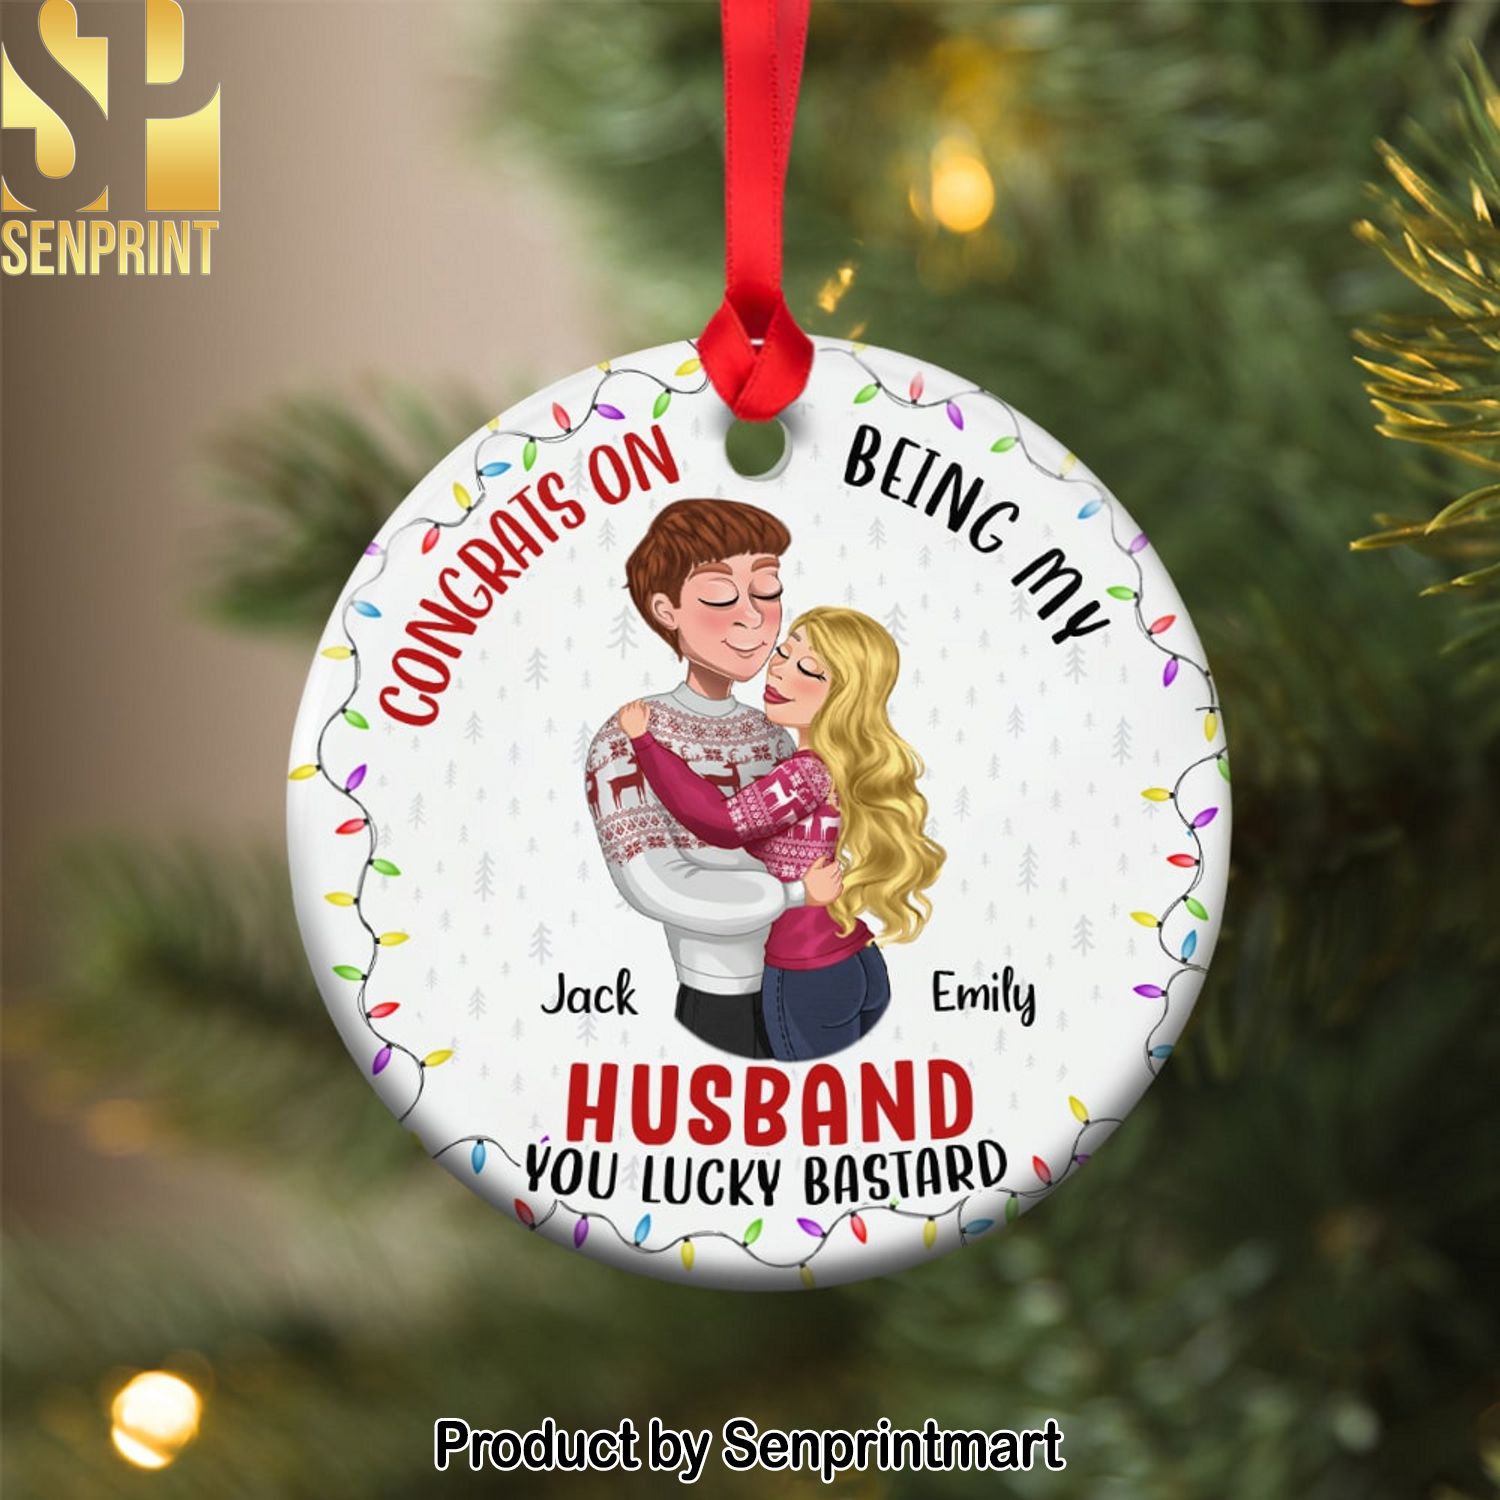 Congrats On Being My Husband, You Lucky Bastard, Personalized Ceramic Circle Ornament, Christmas Gift For Couple